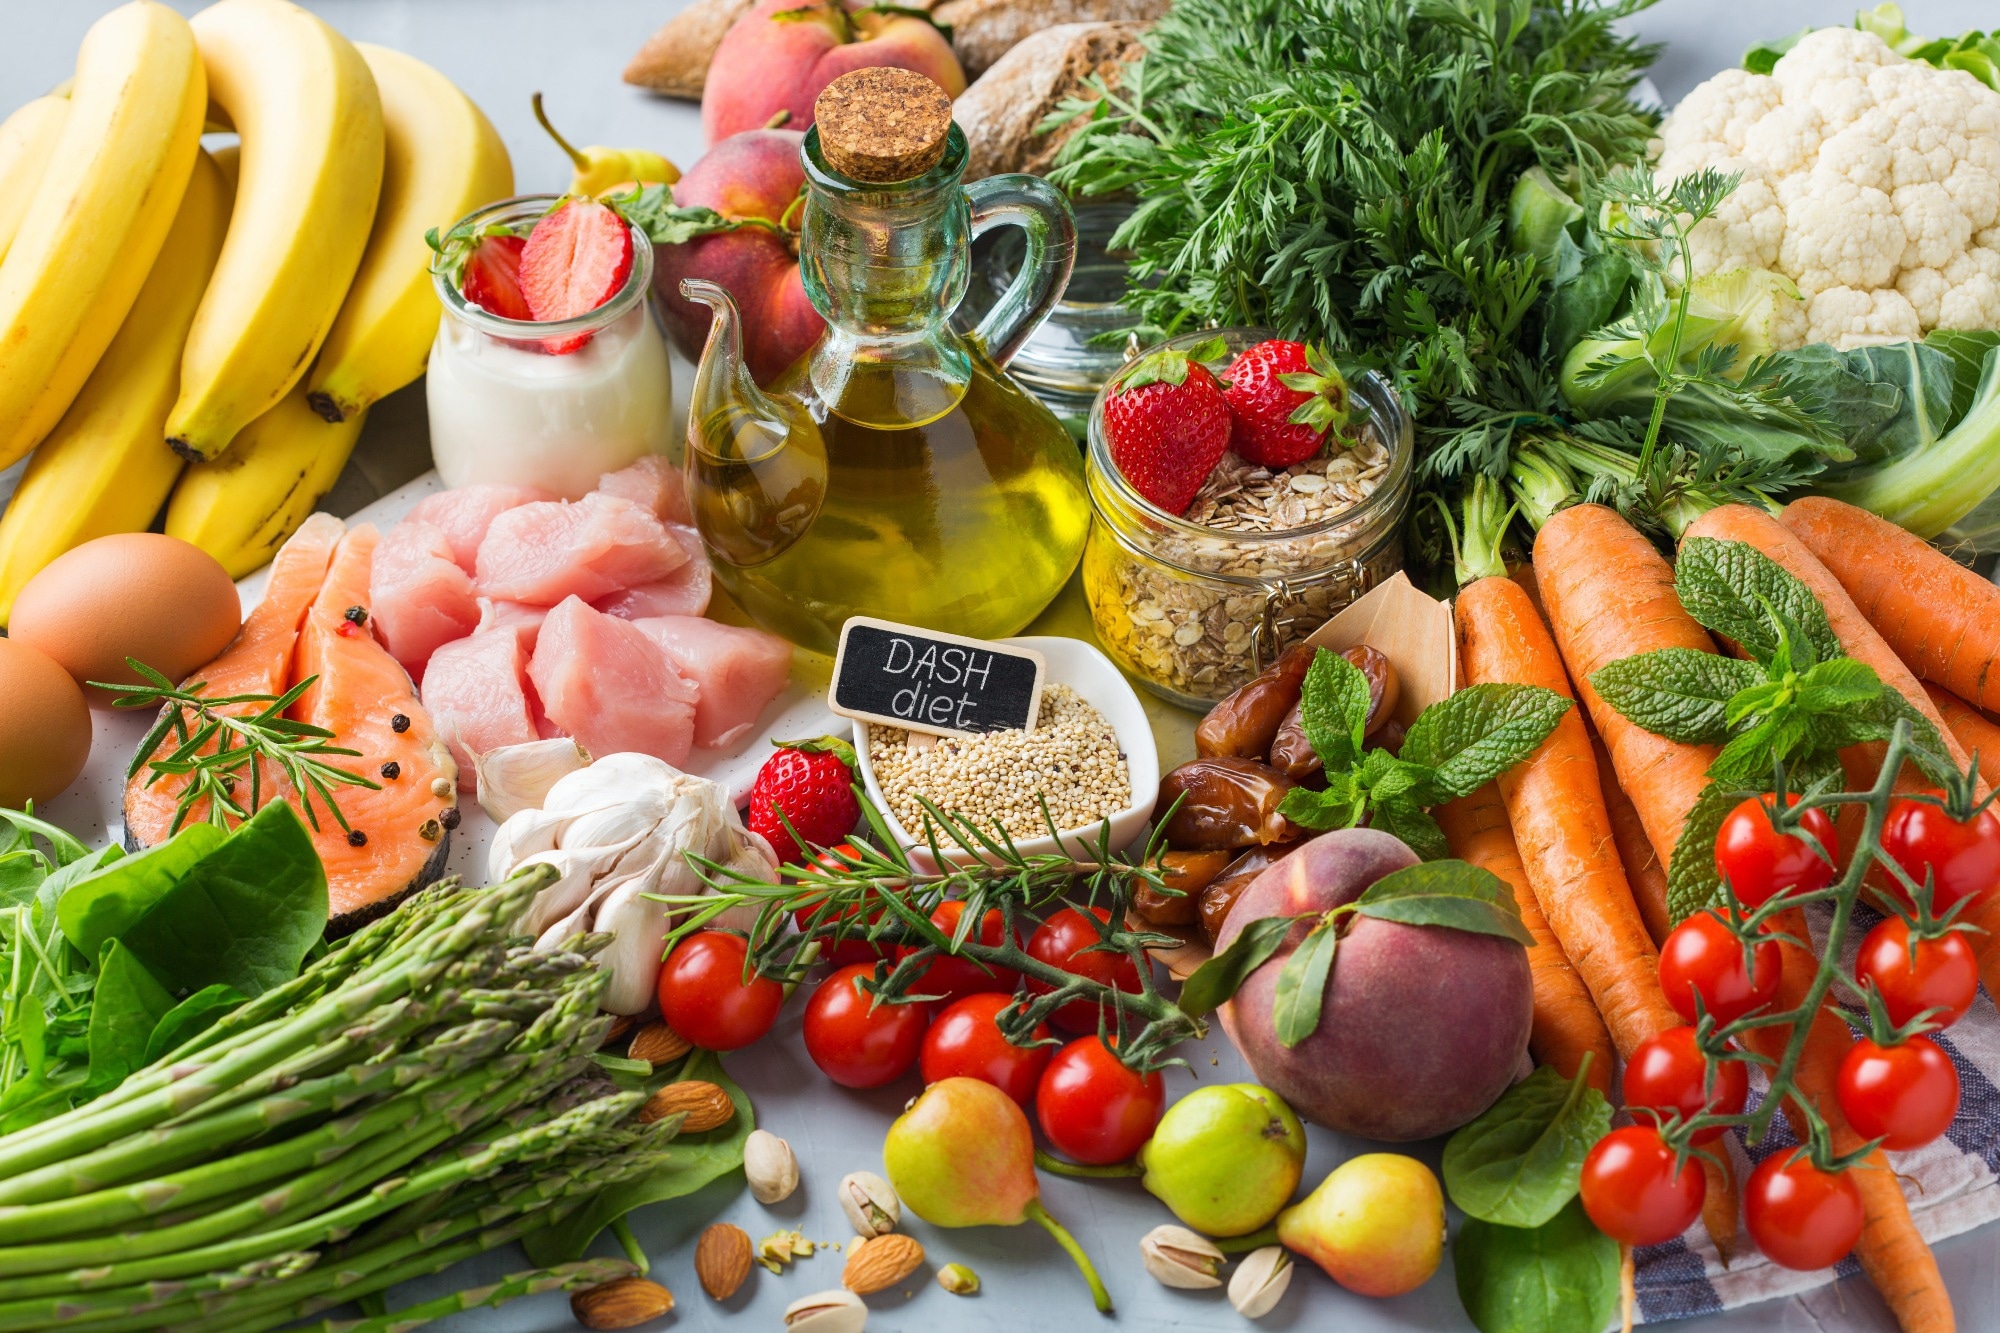 Study: Association of Mediterranean diet with survival after breast cancer diagnosis in women from nine European countries: results from the EPIC cohort study. Image Credit: AntoninaVlasova/Shutterstock.com